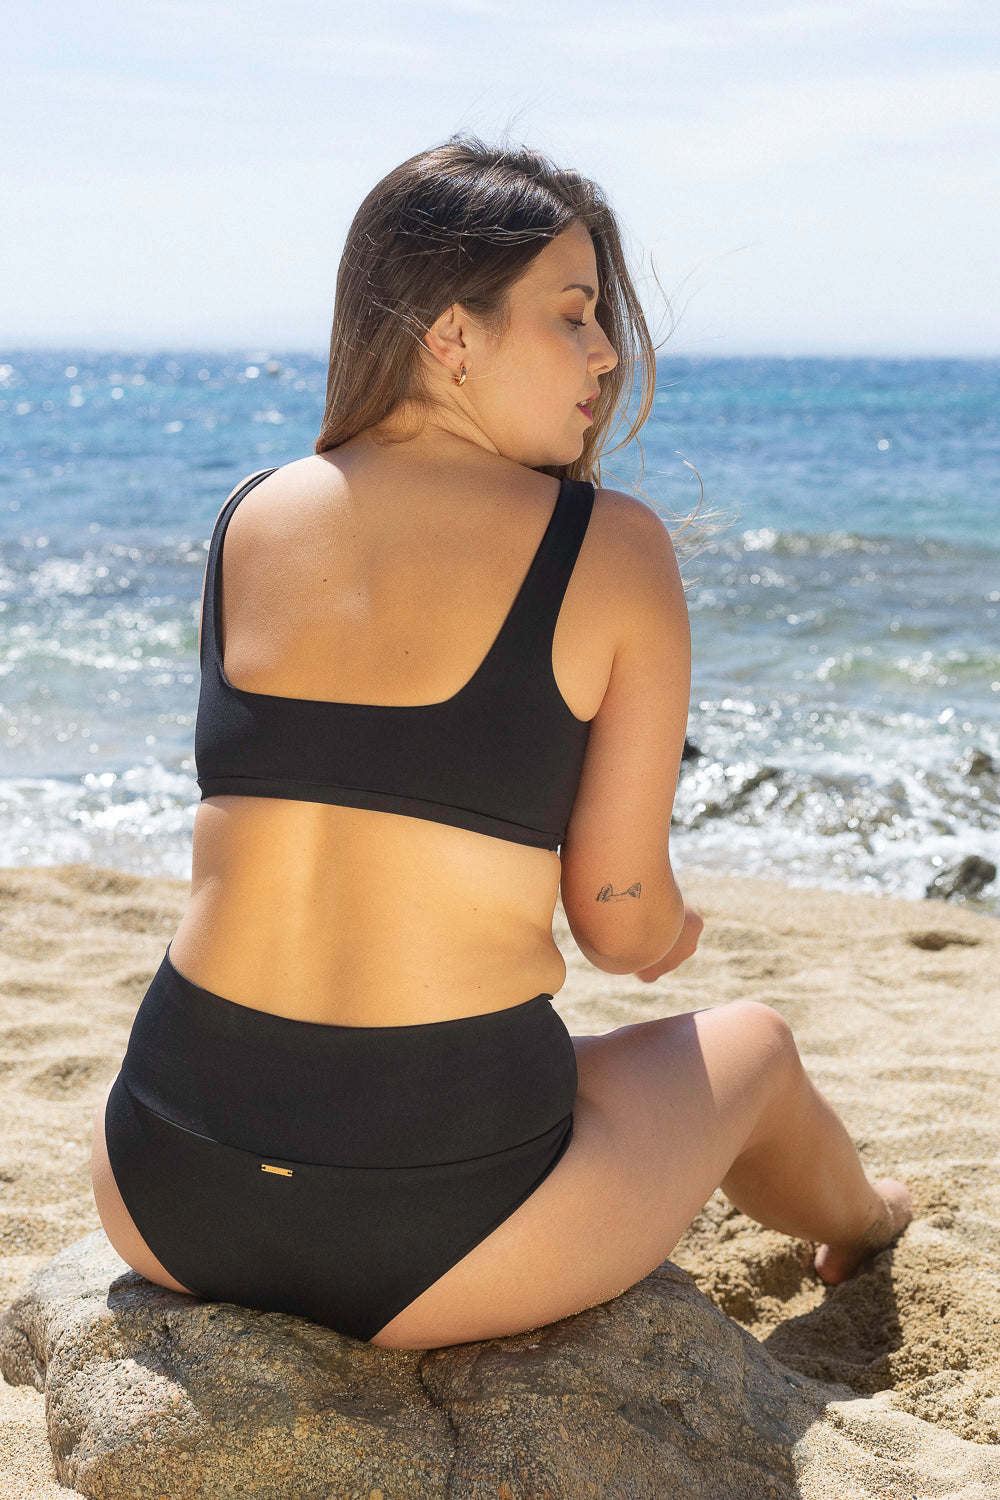 Cropped bikini top with an extra soft touch, fine lining and thick feel. Made sustainably and ethically in Europe from finest polyamide. Perfected fit for every body shape.